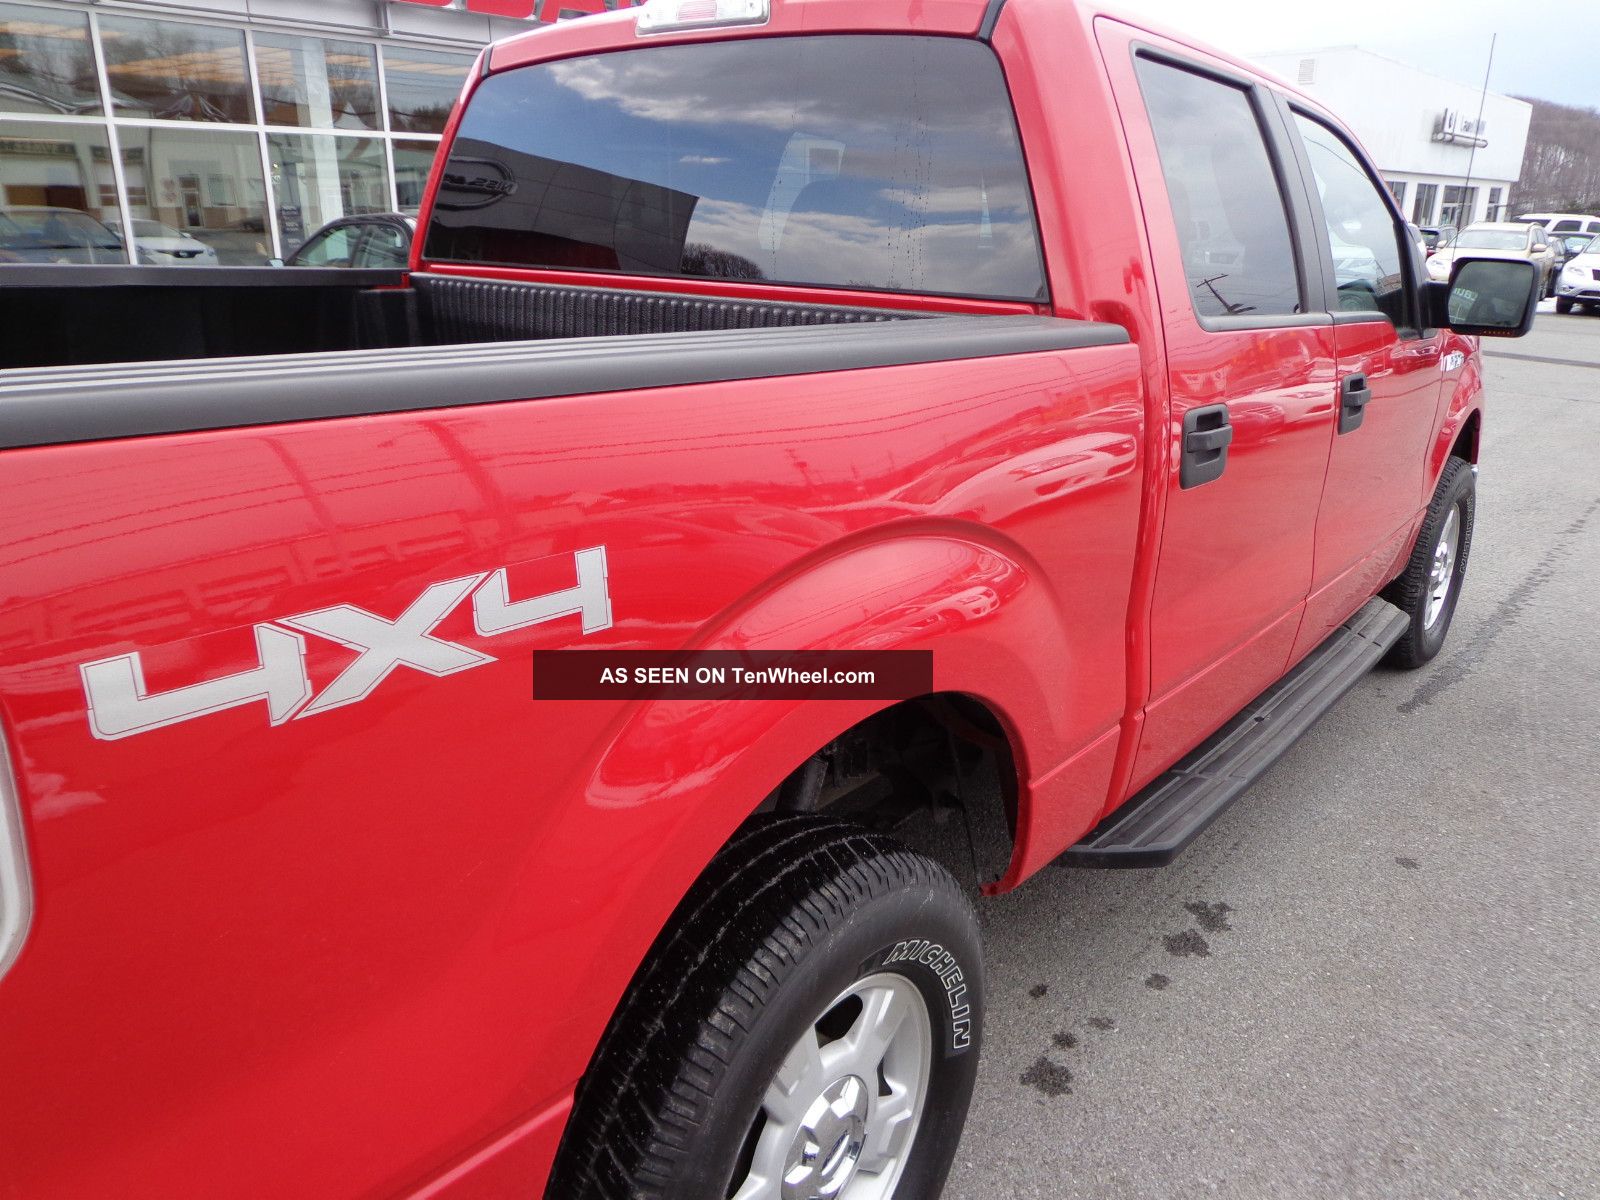 2010 F - 150 Xlt Supercrew 5. 4l V8 4x4 Tow Package Bed Liner Flex Fuel 2010 Ford F150 5.4 L Towing Capacity